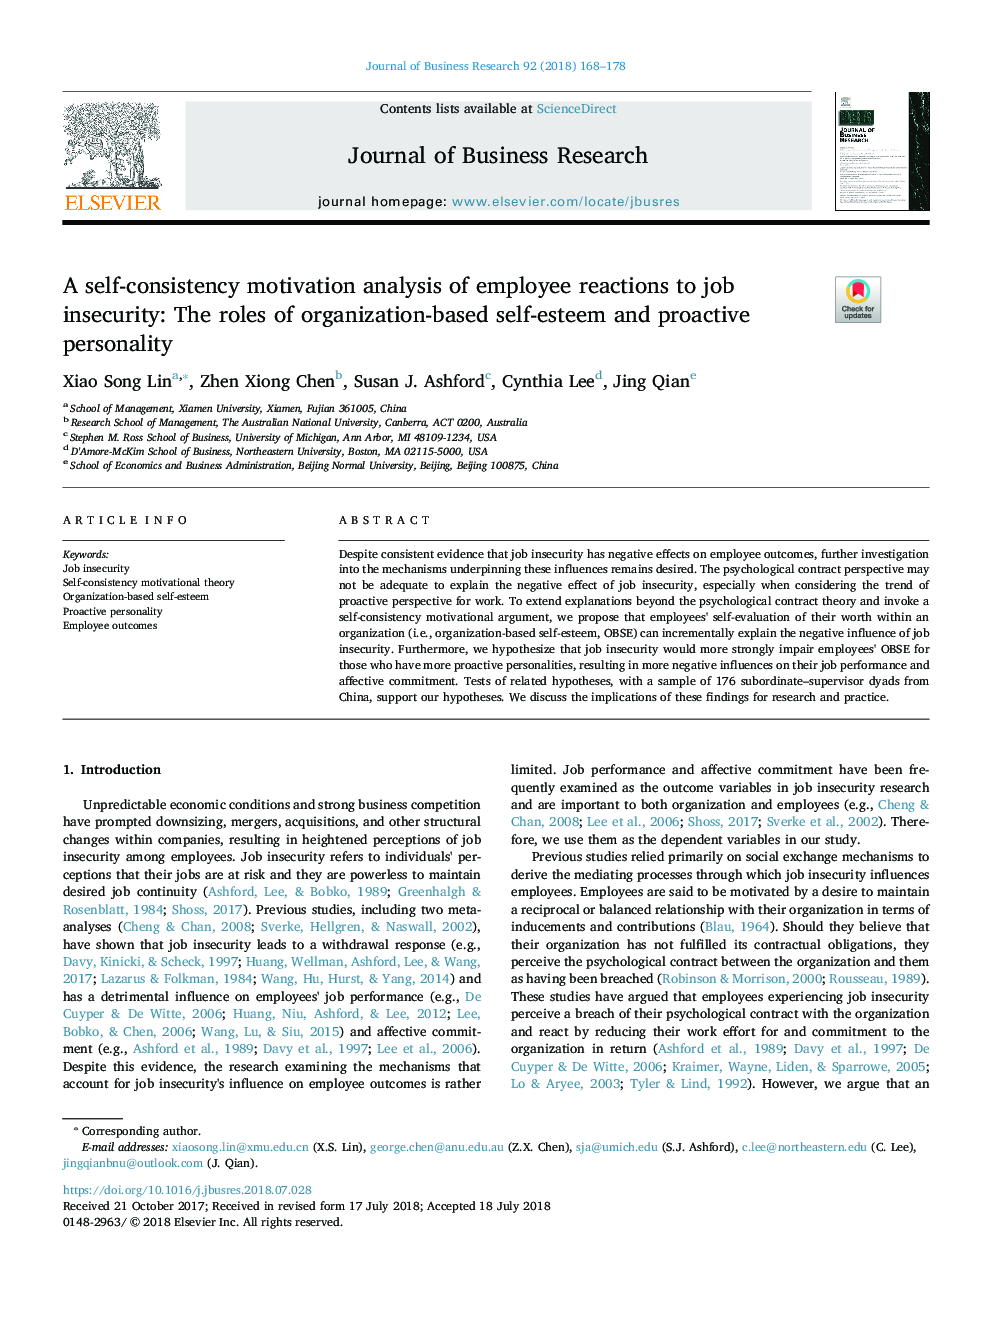 A self-consistency motivation analysis of employee reactions to job insecurity: The roles of organization-based self-esteem and proactive personality